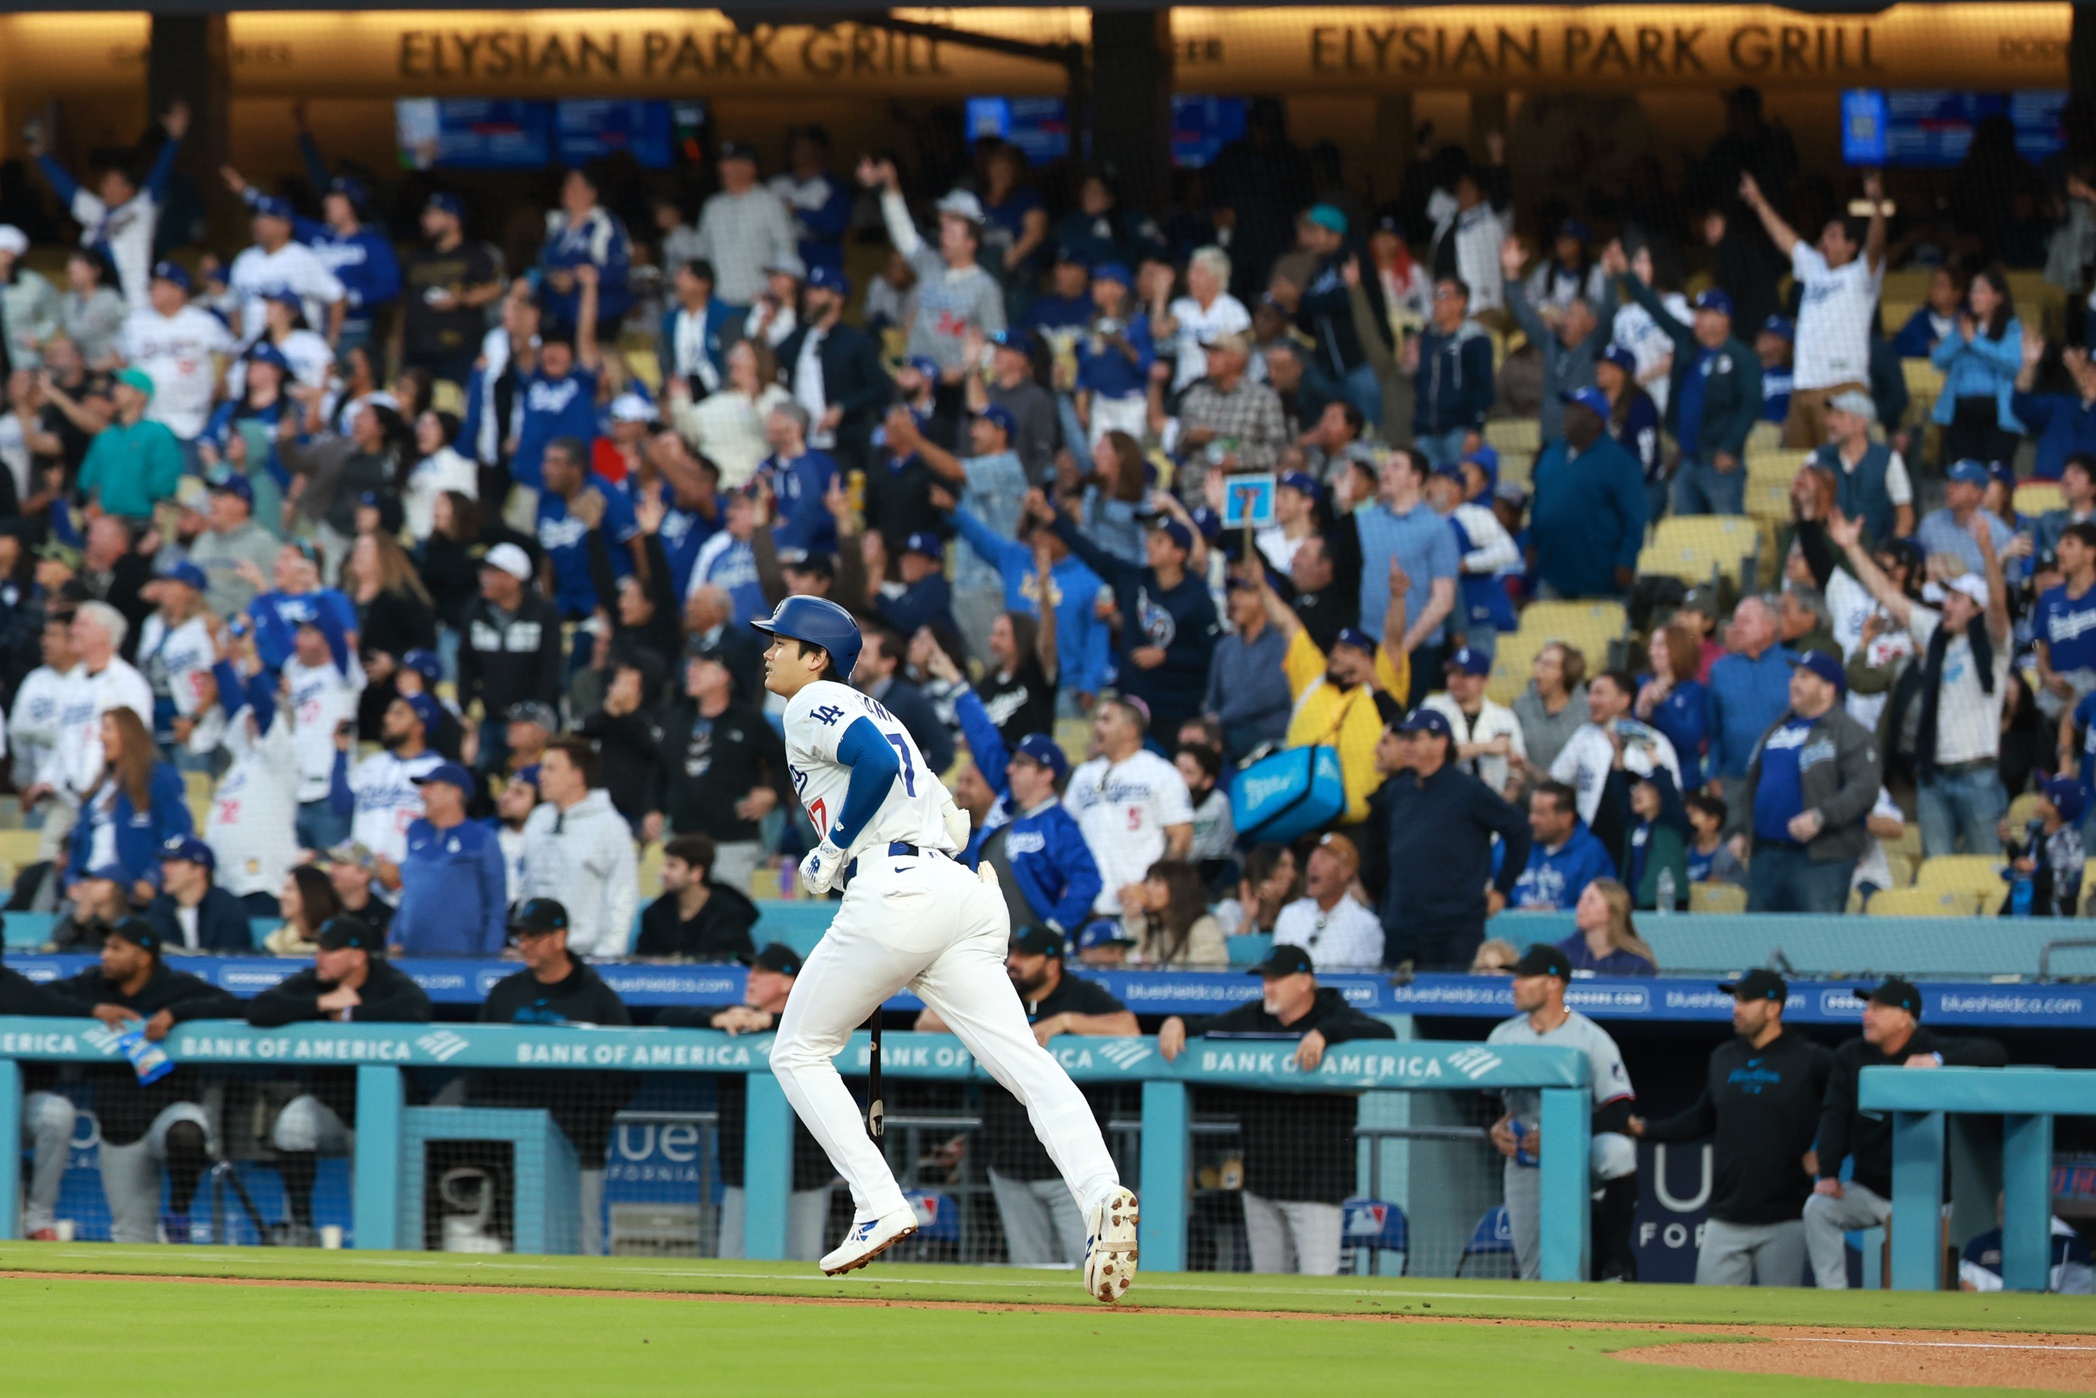 Dodgers $700 Million Man is Positioning Himself for Another MVP Campaign